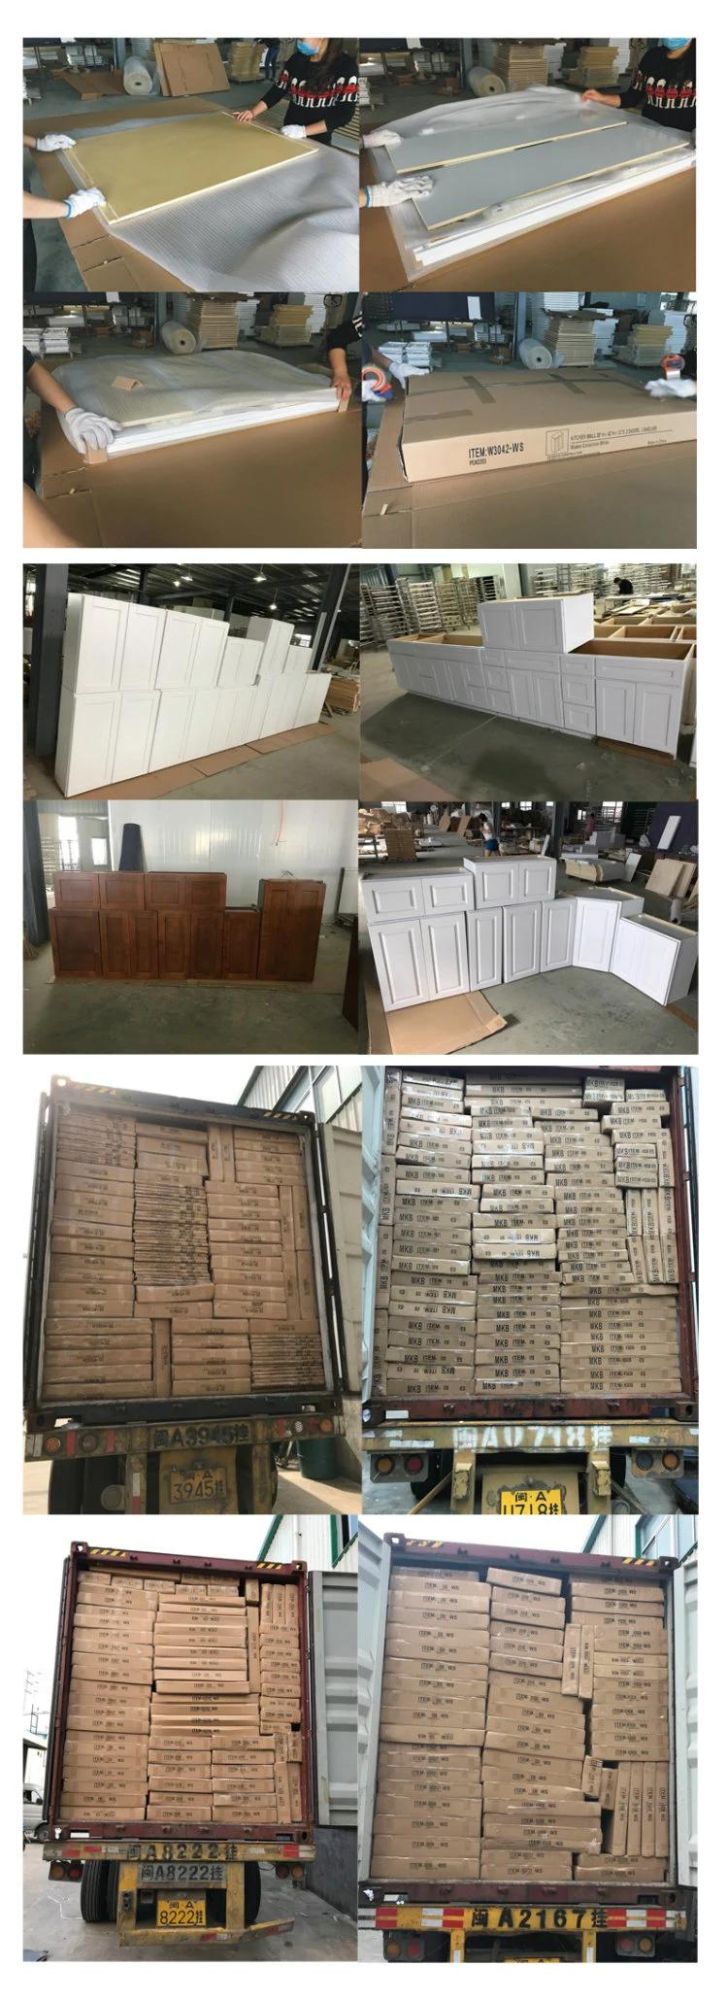 2020 Factory Direct American Modern Modular Solid Wood Kitchen Cabinets Wholesale